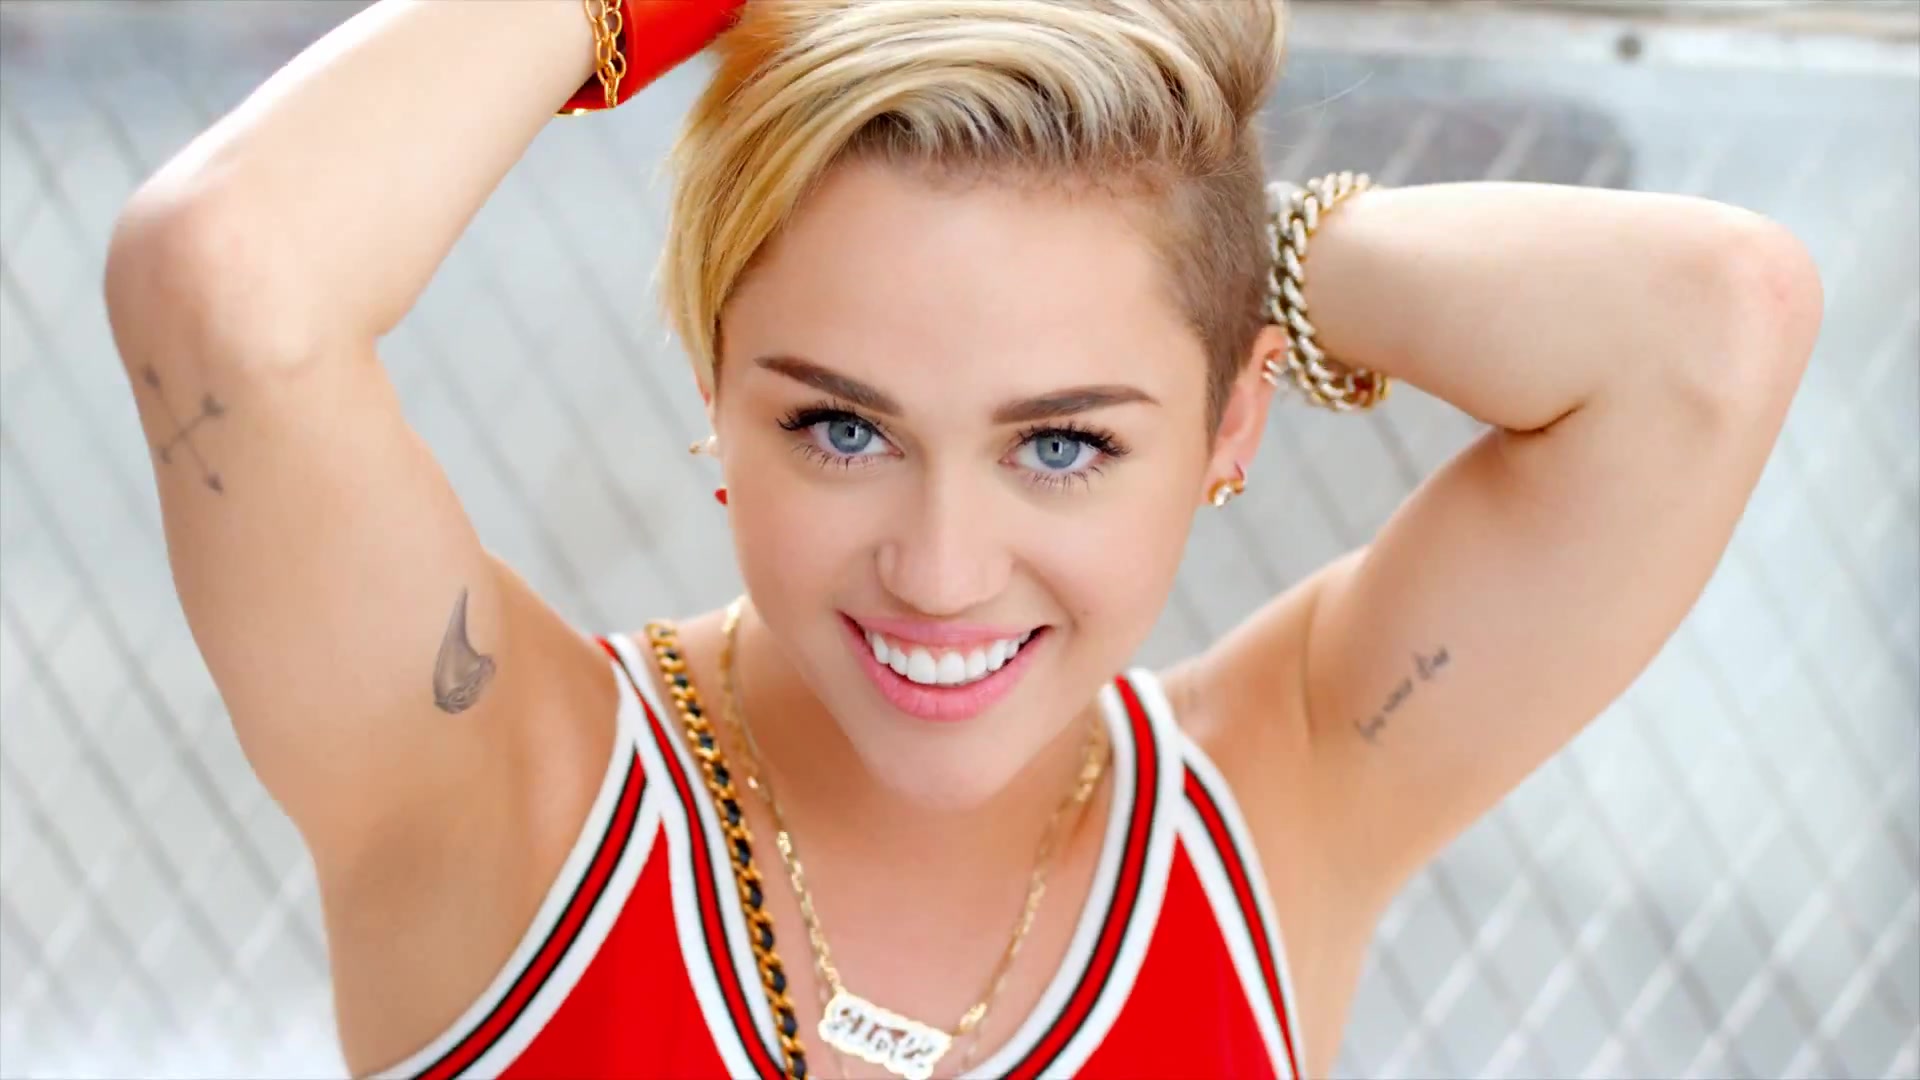 Miley Cyrus Wallpaper HD Background Pictures To Pin